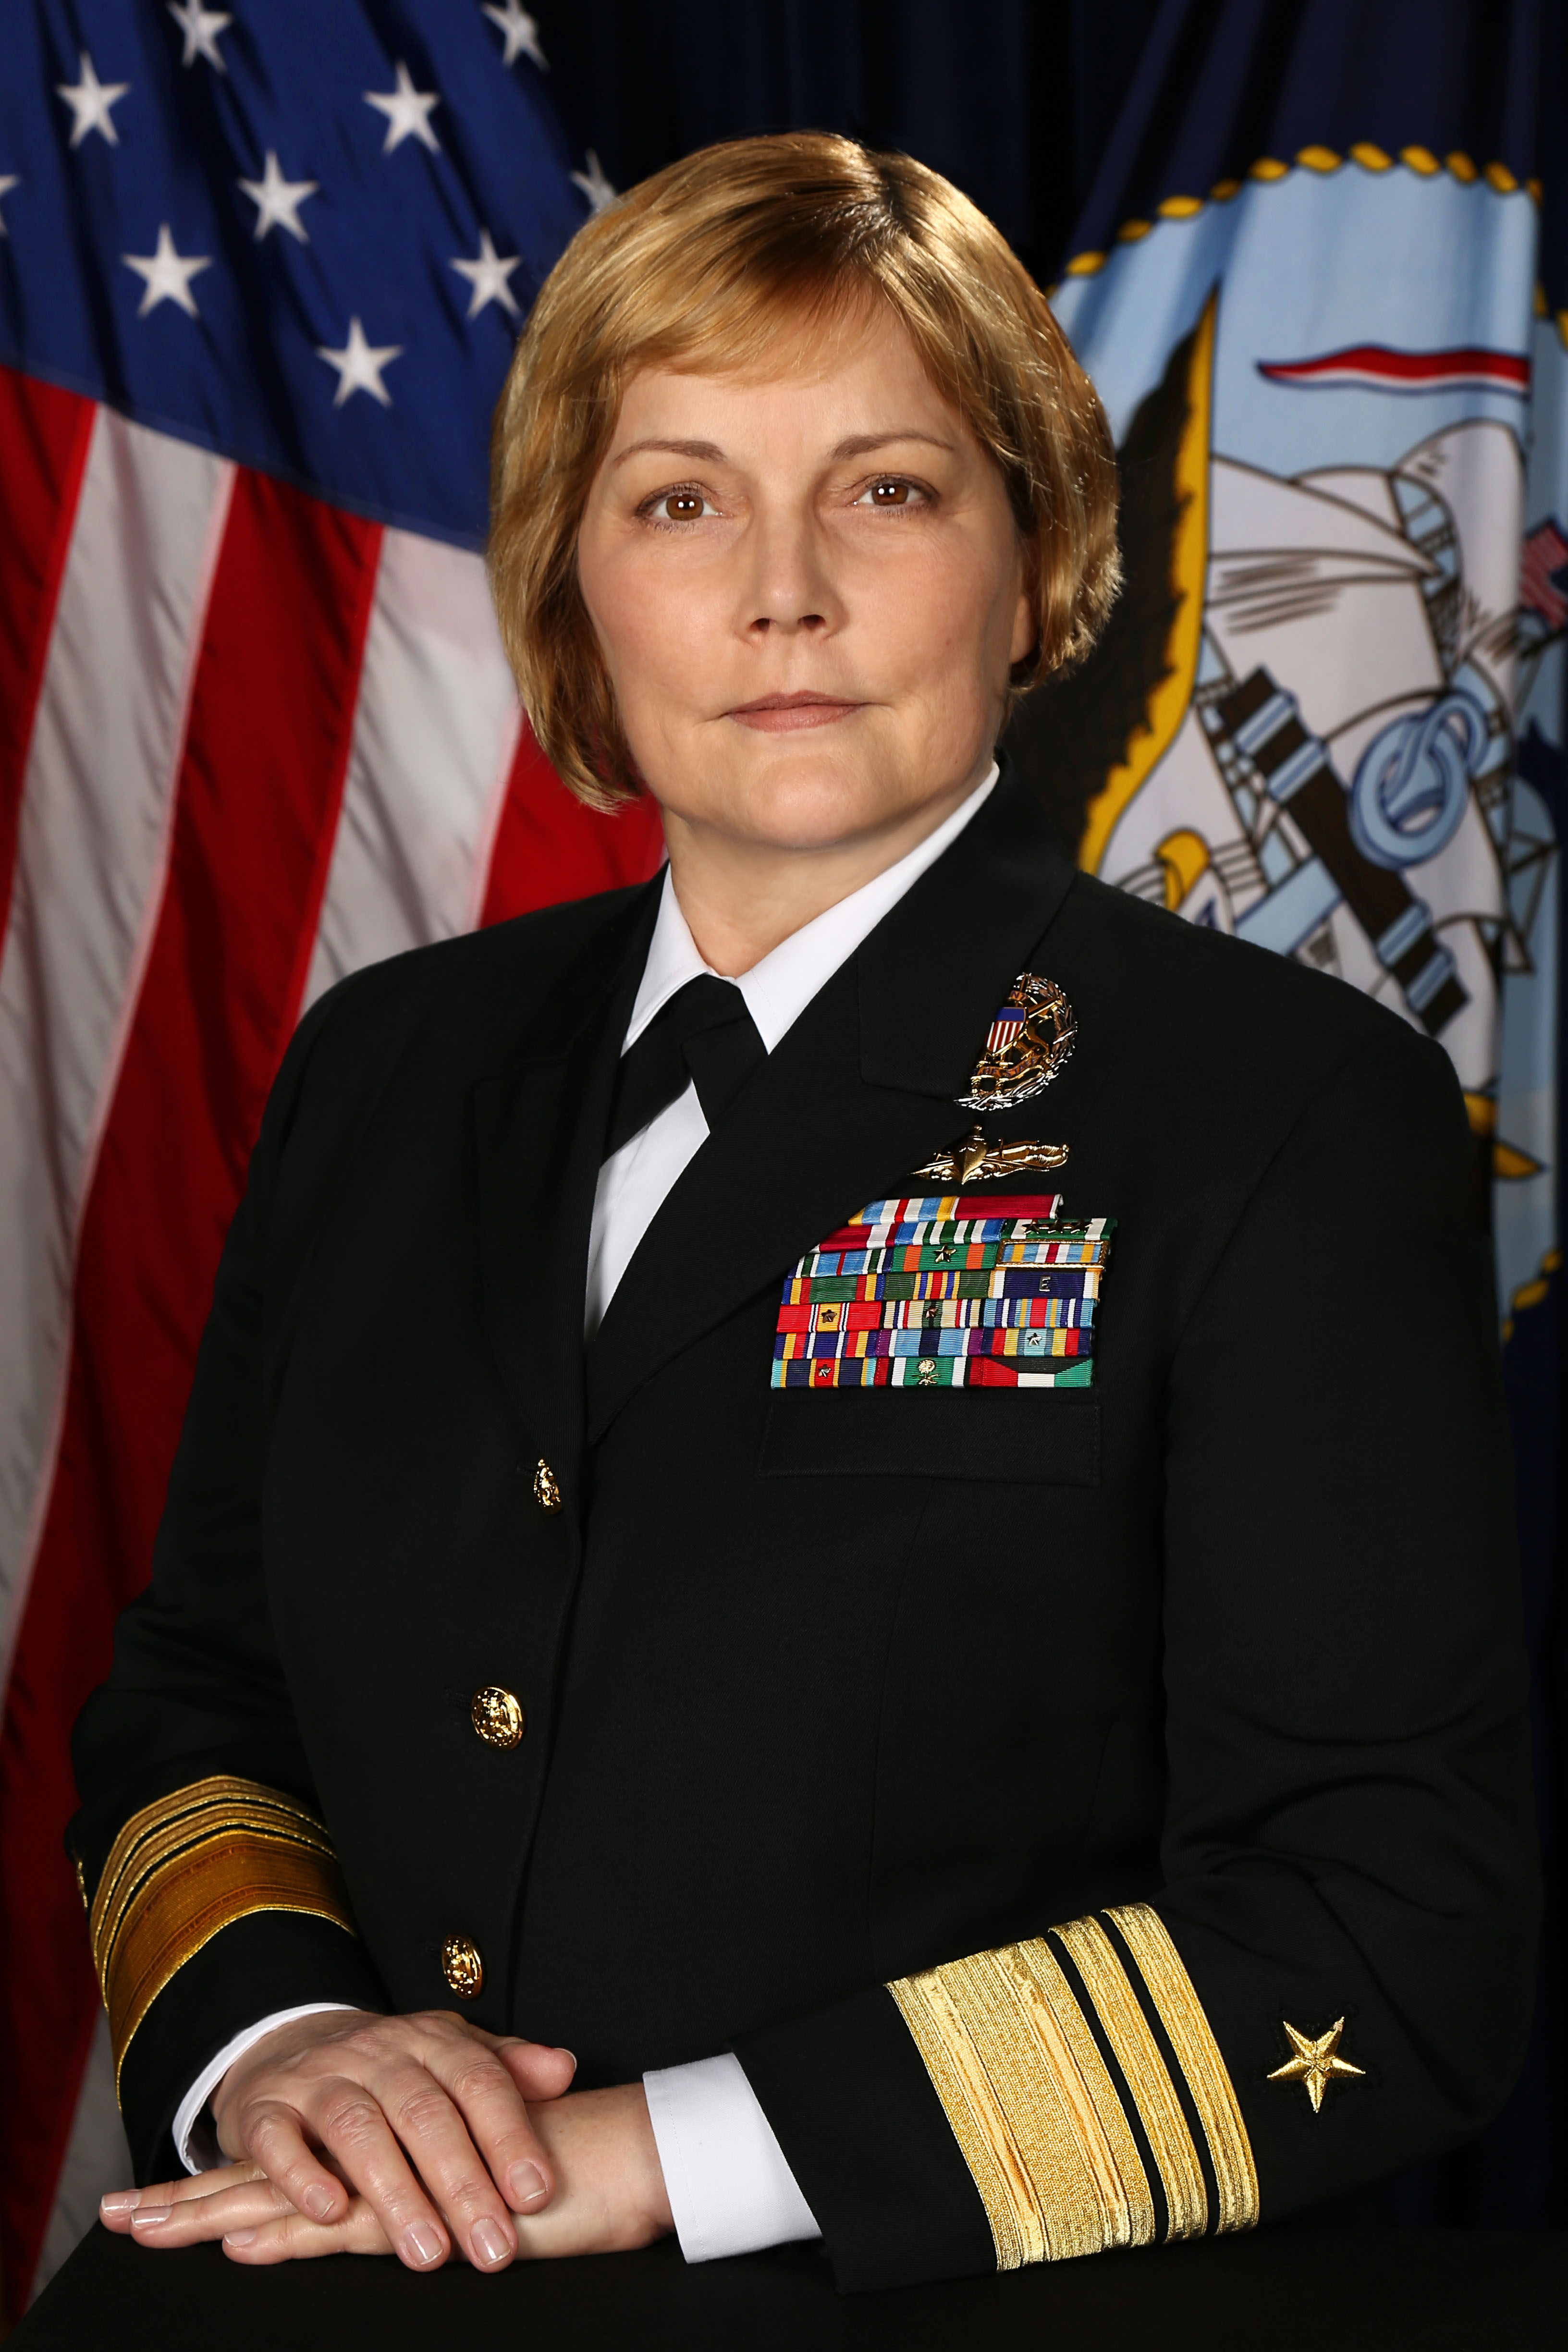 NCIS as Admiral Janet Clyburn. Directed by Terrence O'Hara.